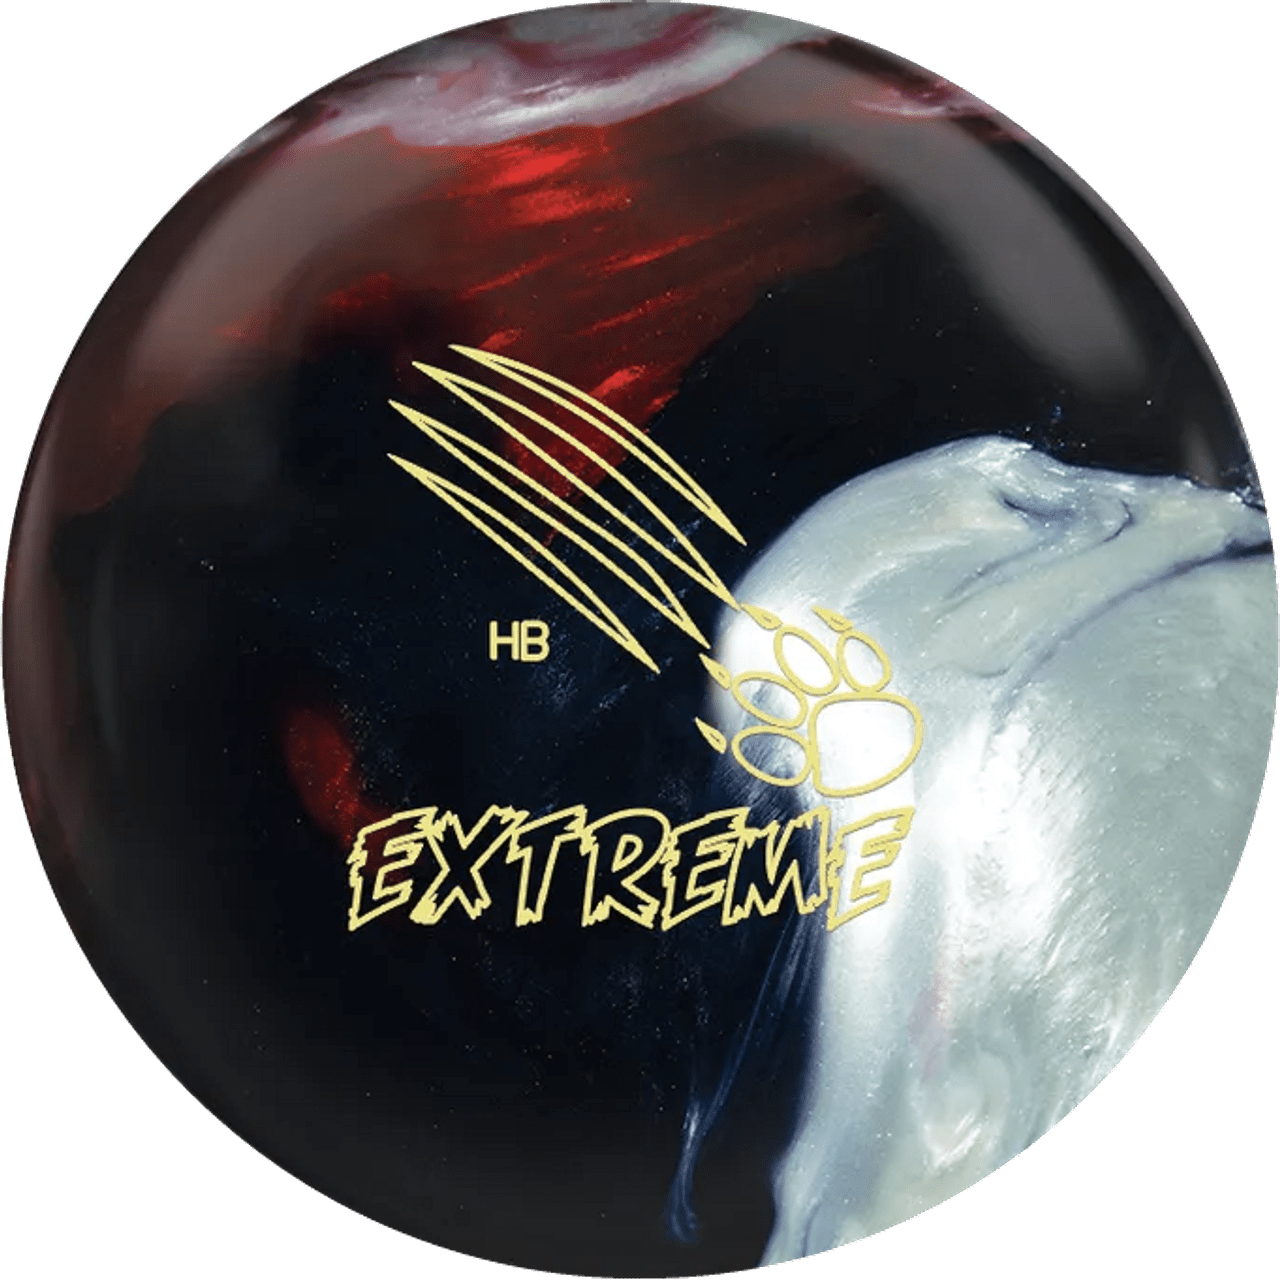 900 Global Honey Badger Extreme Pearl | The Bowlidex